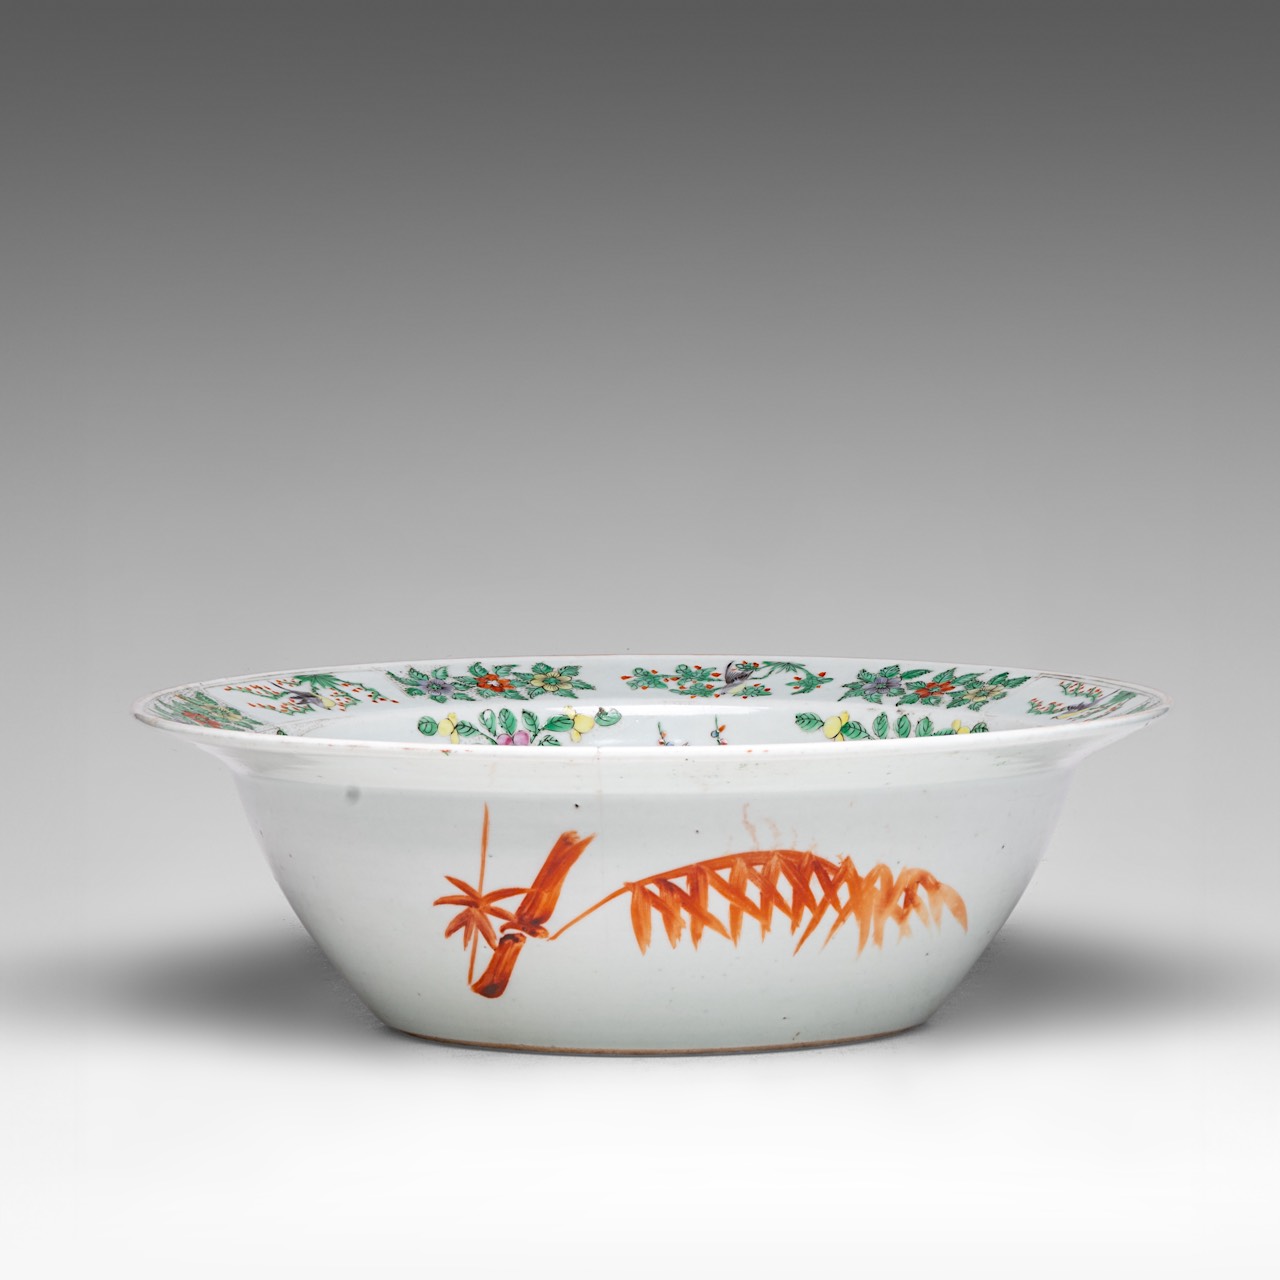 A Chinese Qianjiangcai 'Ladies in a chamber' basin bowl, late 19thC, dia 37,5 - H 11,8 cm - Image 4 of 7